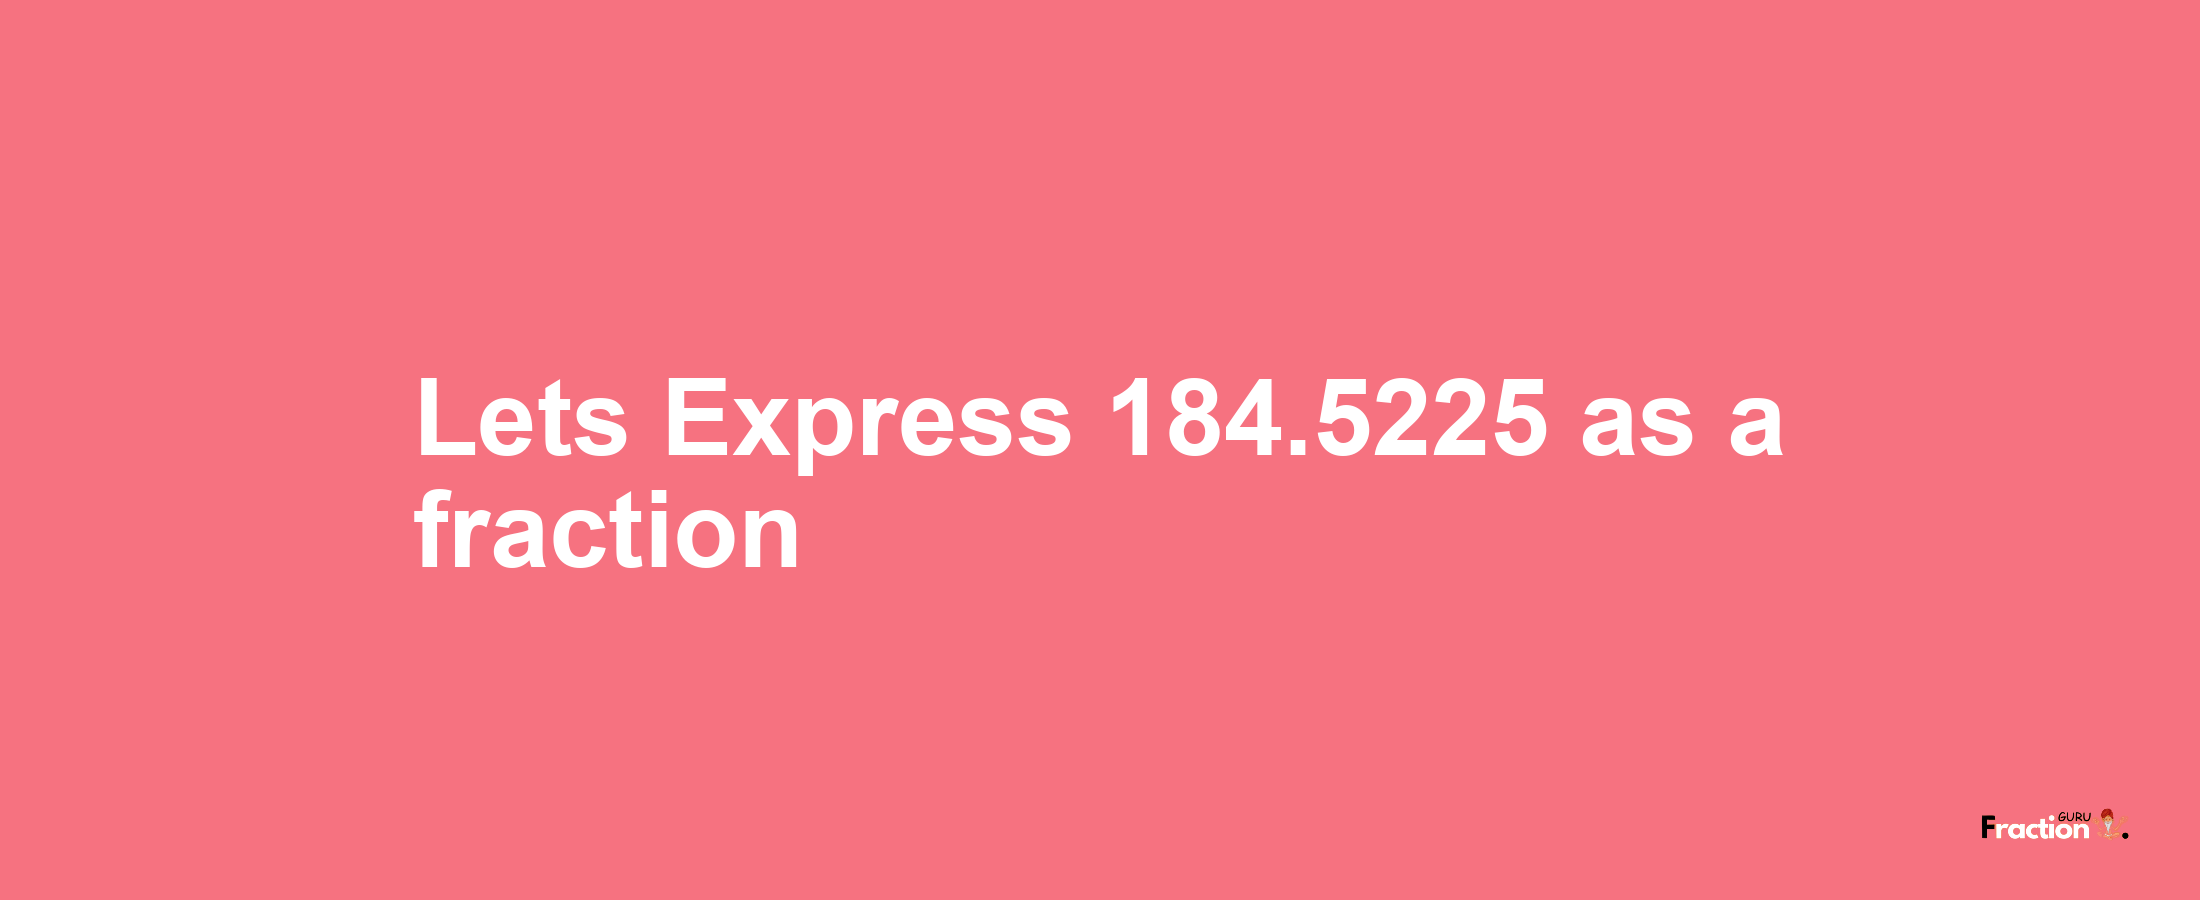 Lets Express 184.5225 as afraction